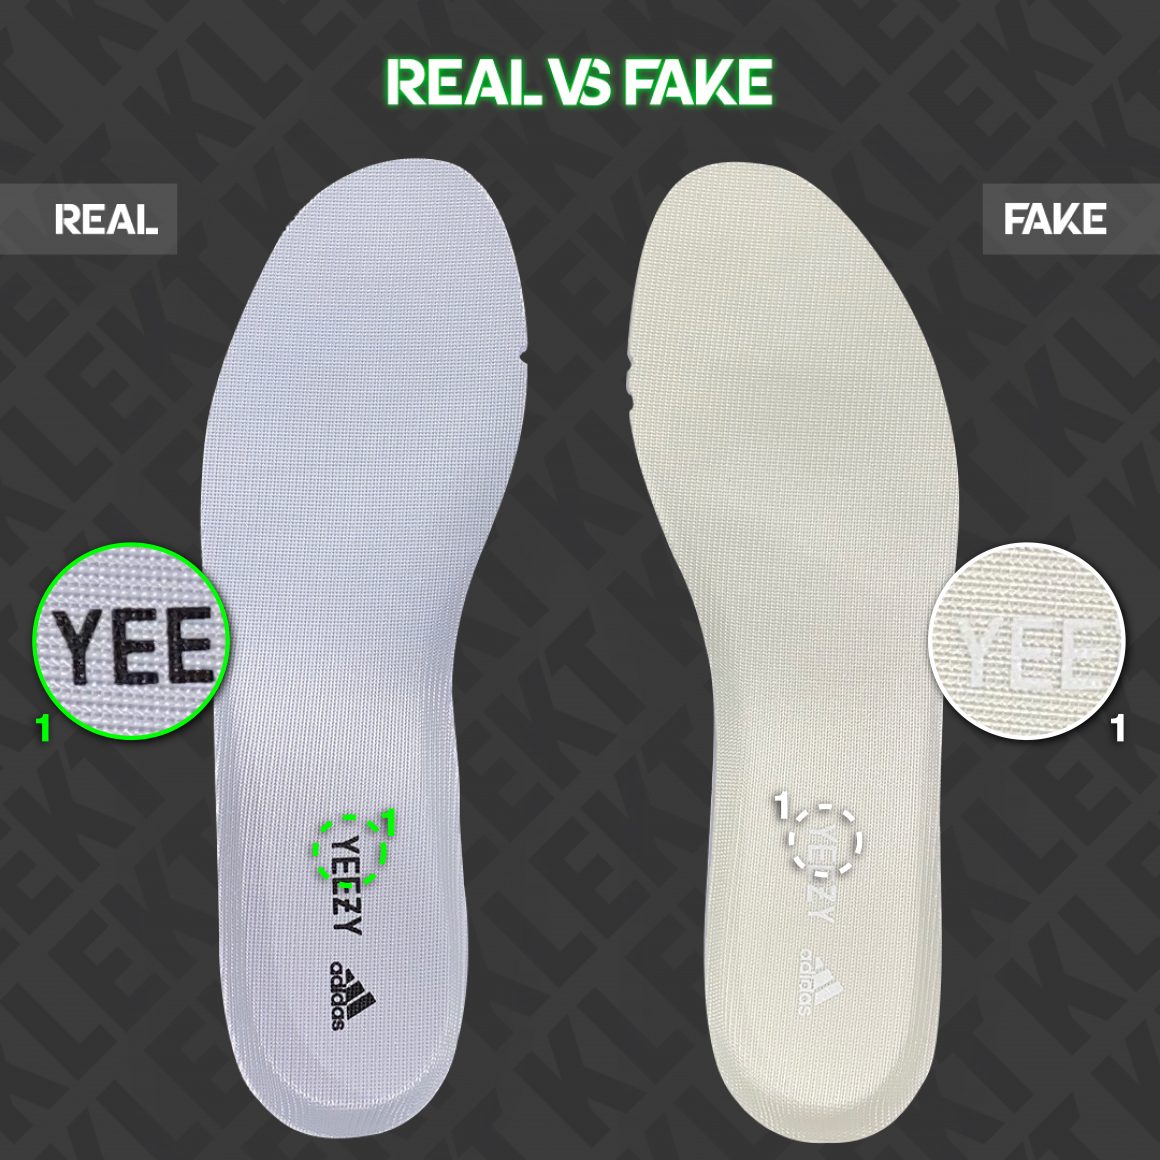 adidas Yeezy Boost 380 Alien Real vs Fake Insole Comparison